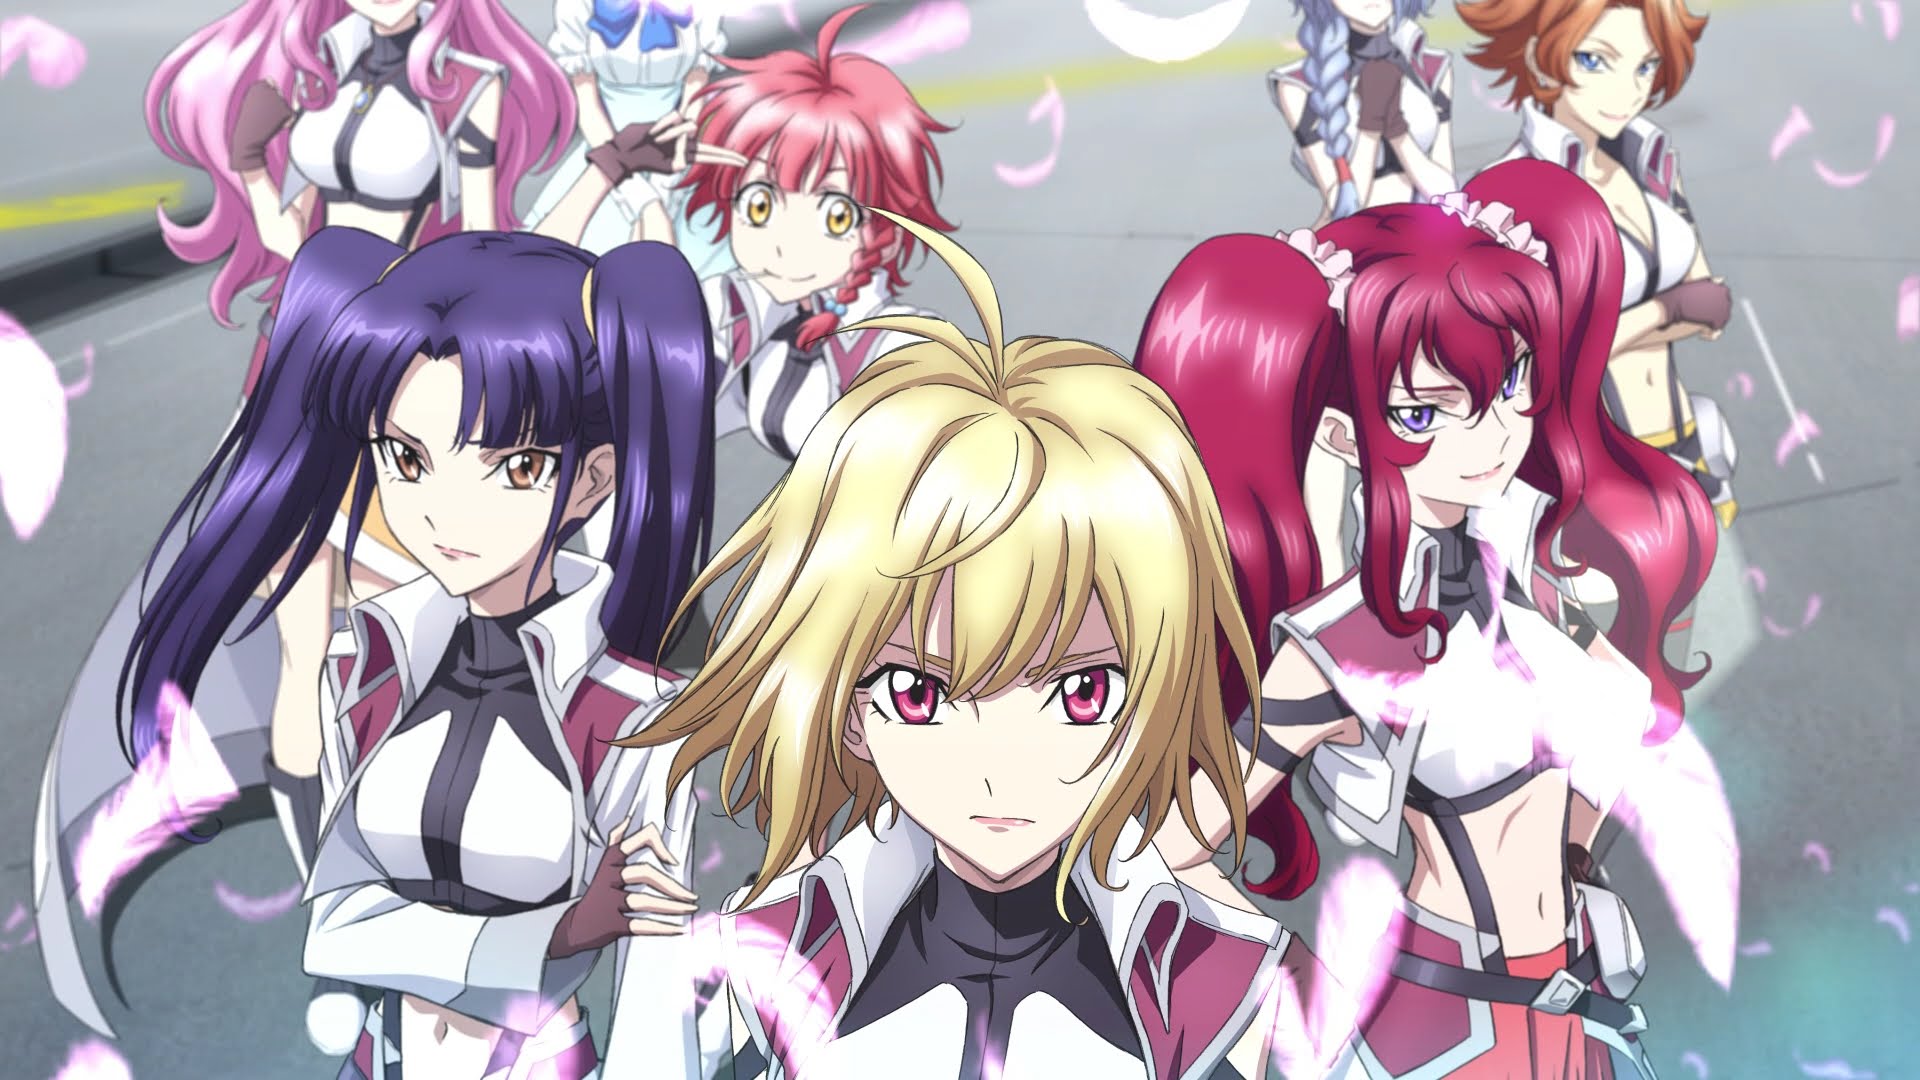 A Cross Ange Vita Release Date Announced For Japan.